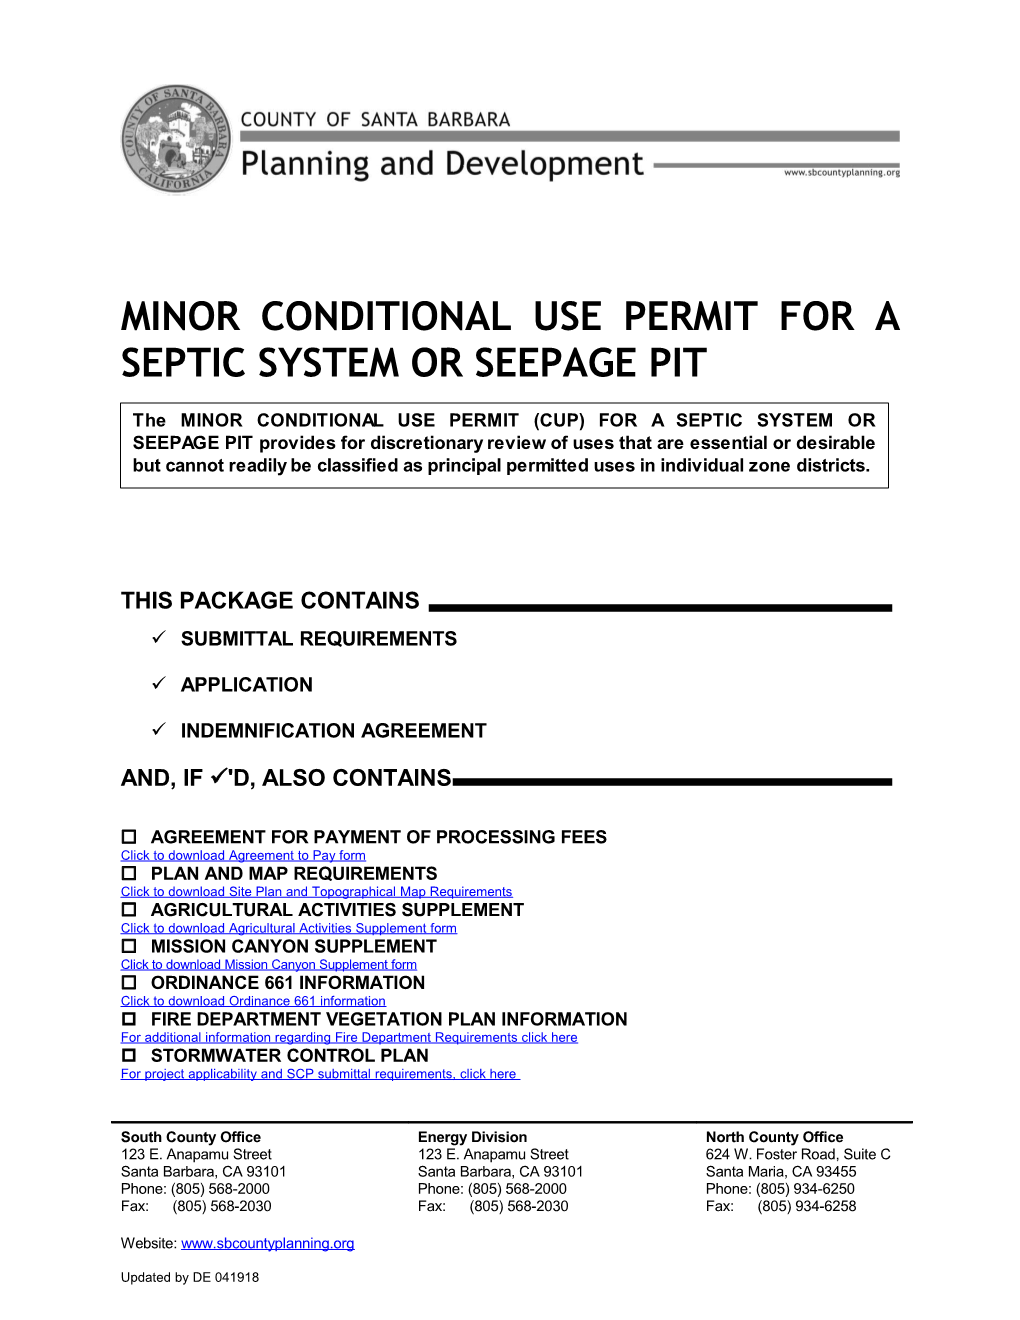 Minor Conditional Use Permit for a Septic System Or Seepage Pit